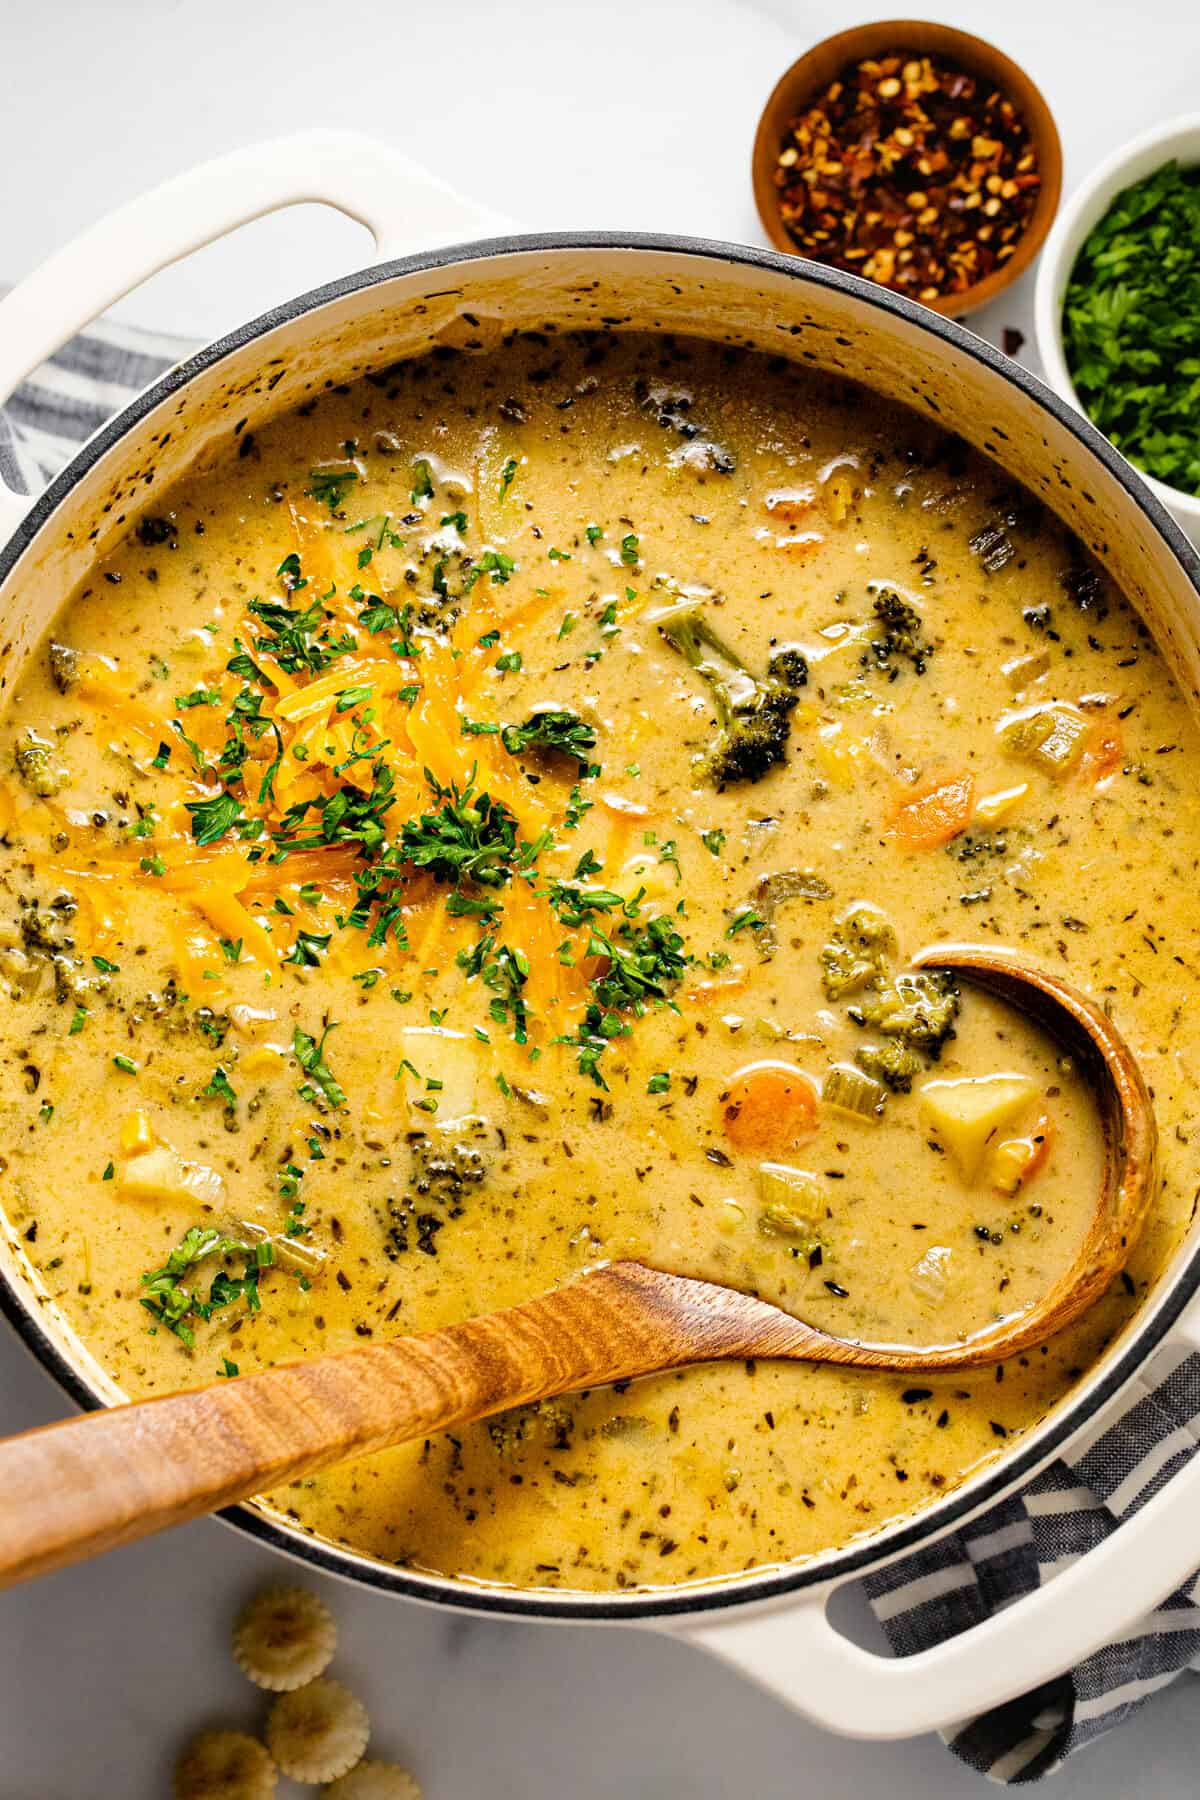 Large white pot filled with cheesy vegetable soup garnished with parsley